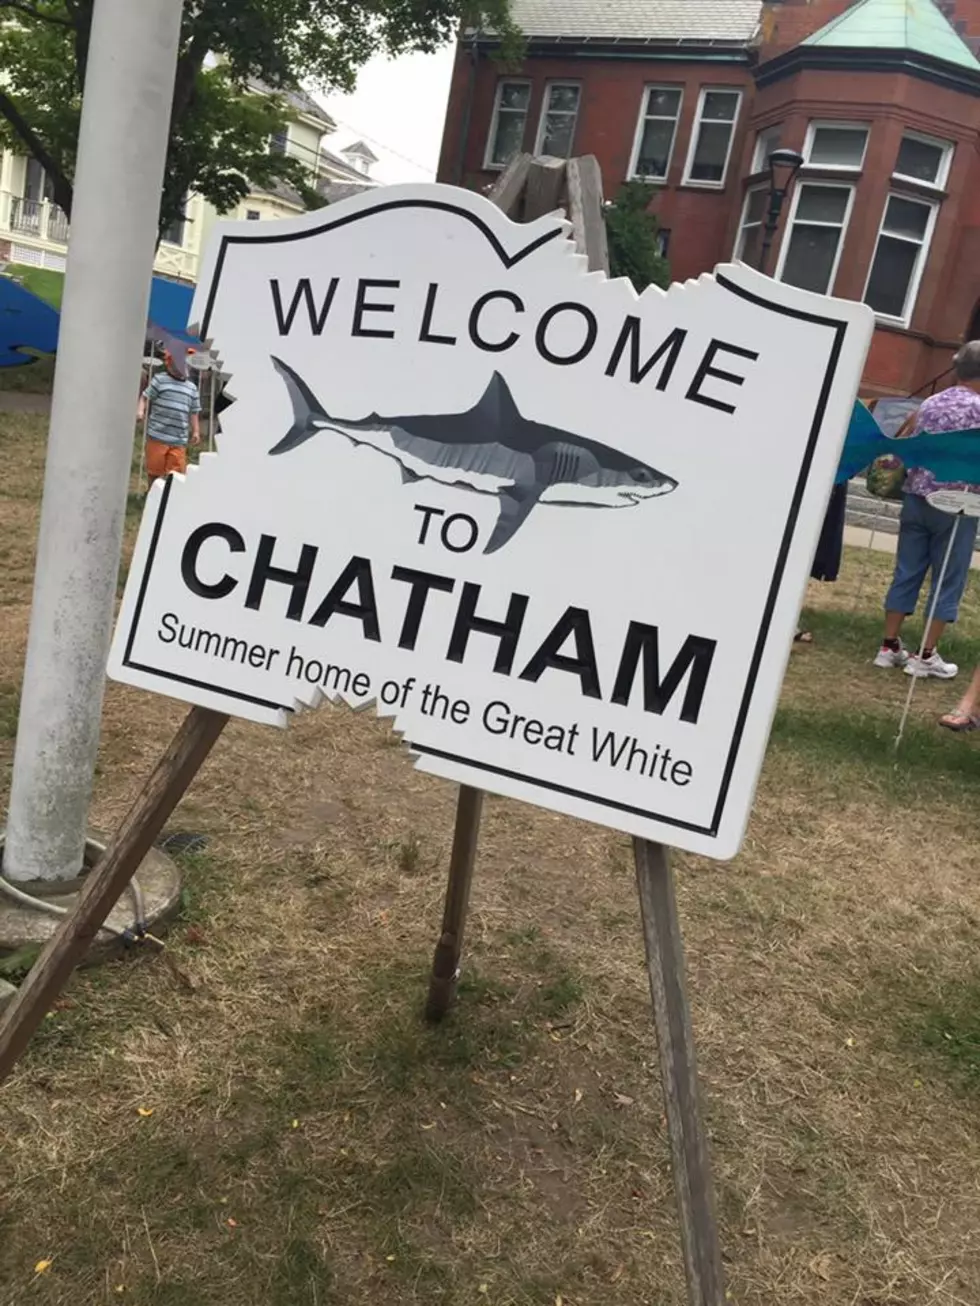 Great White Caught Off Chatham